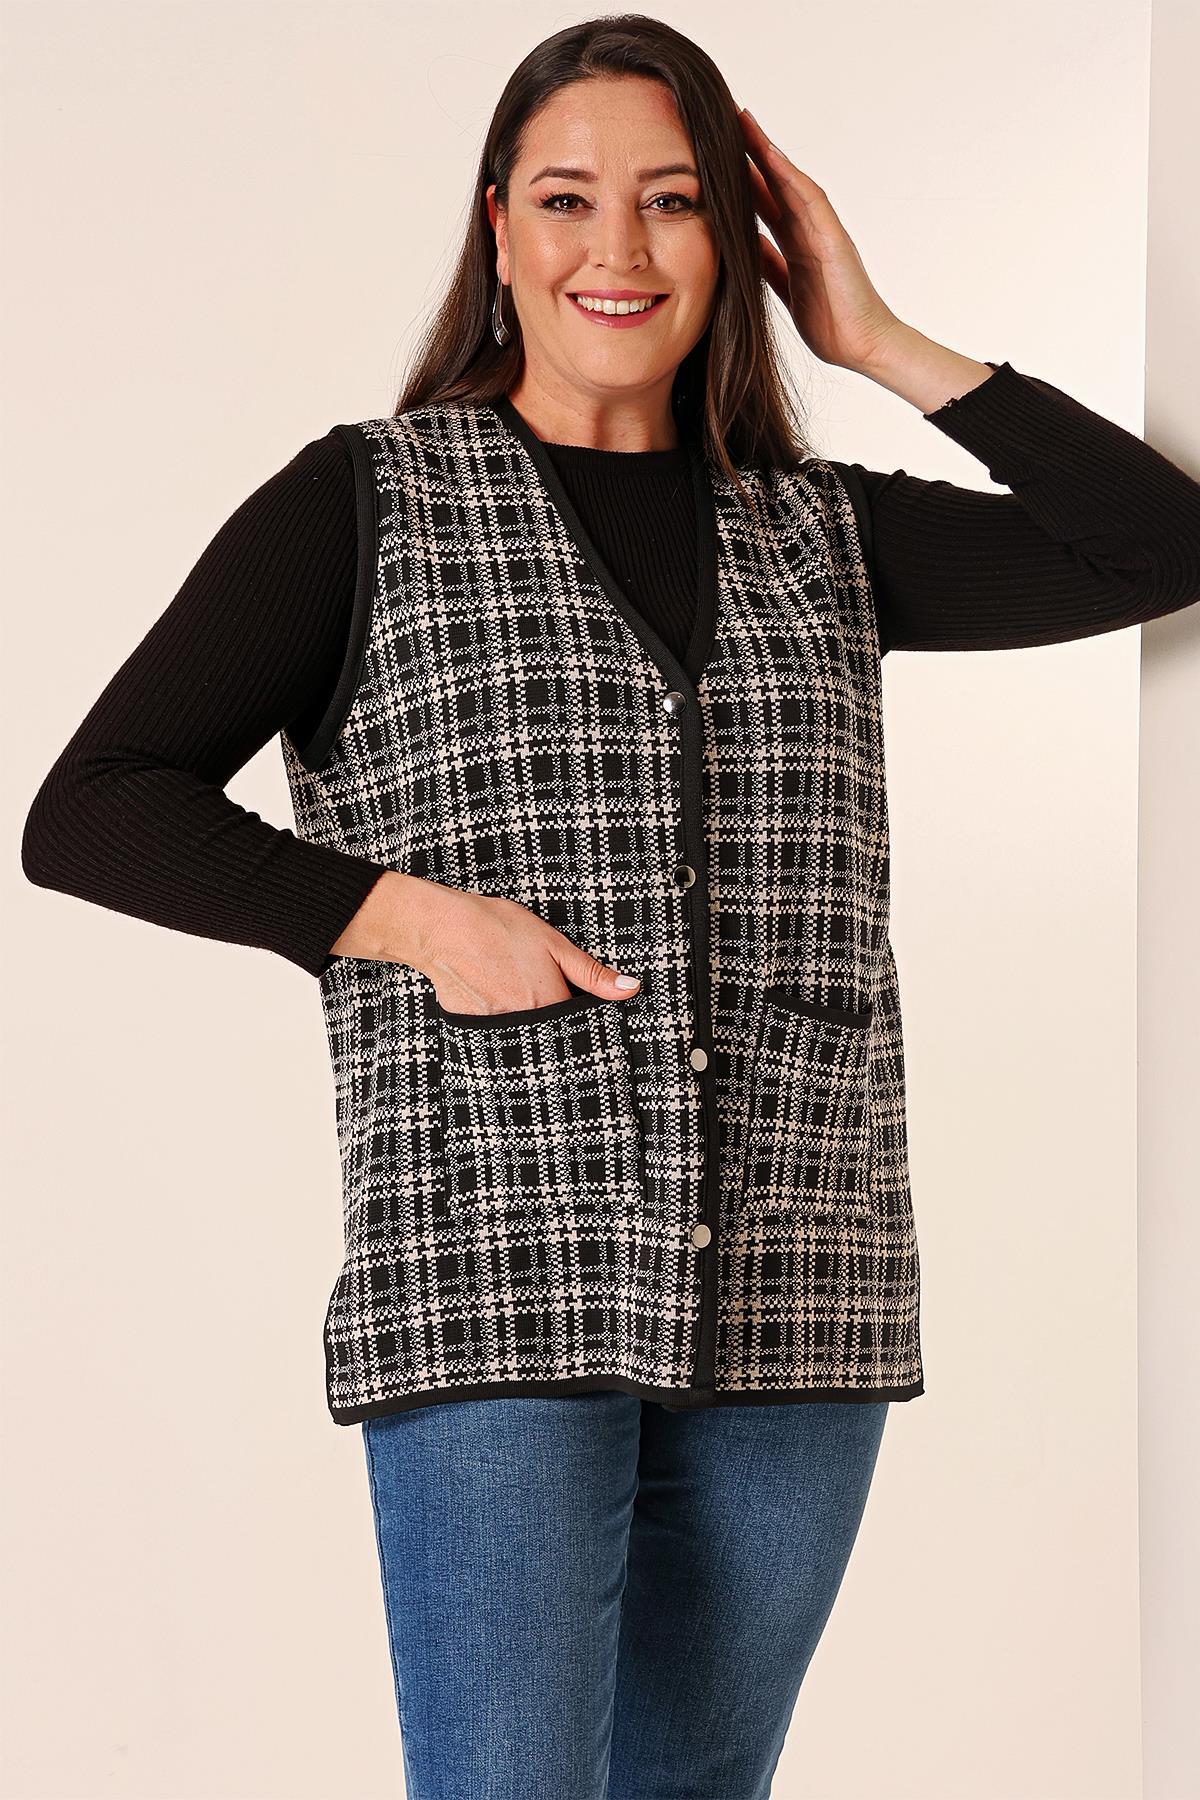 By Saygı Metal Button Front Checkered Plus Size Knitwear Vest with Pocket